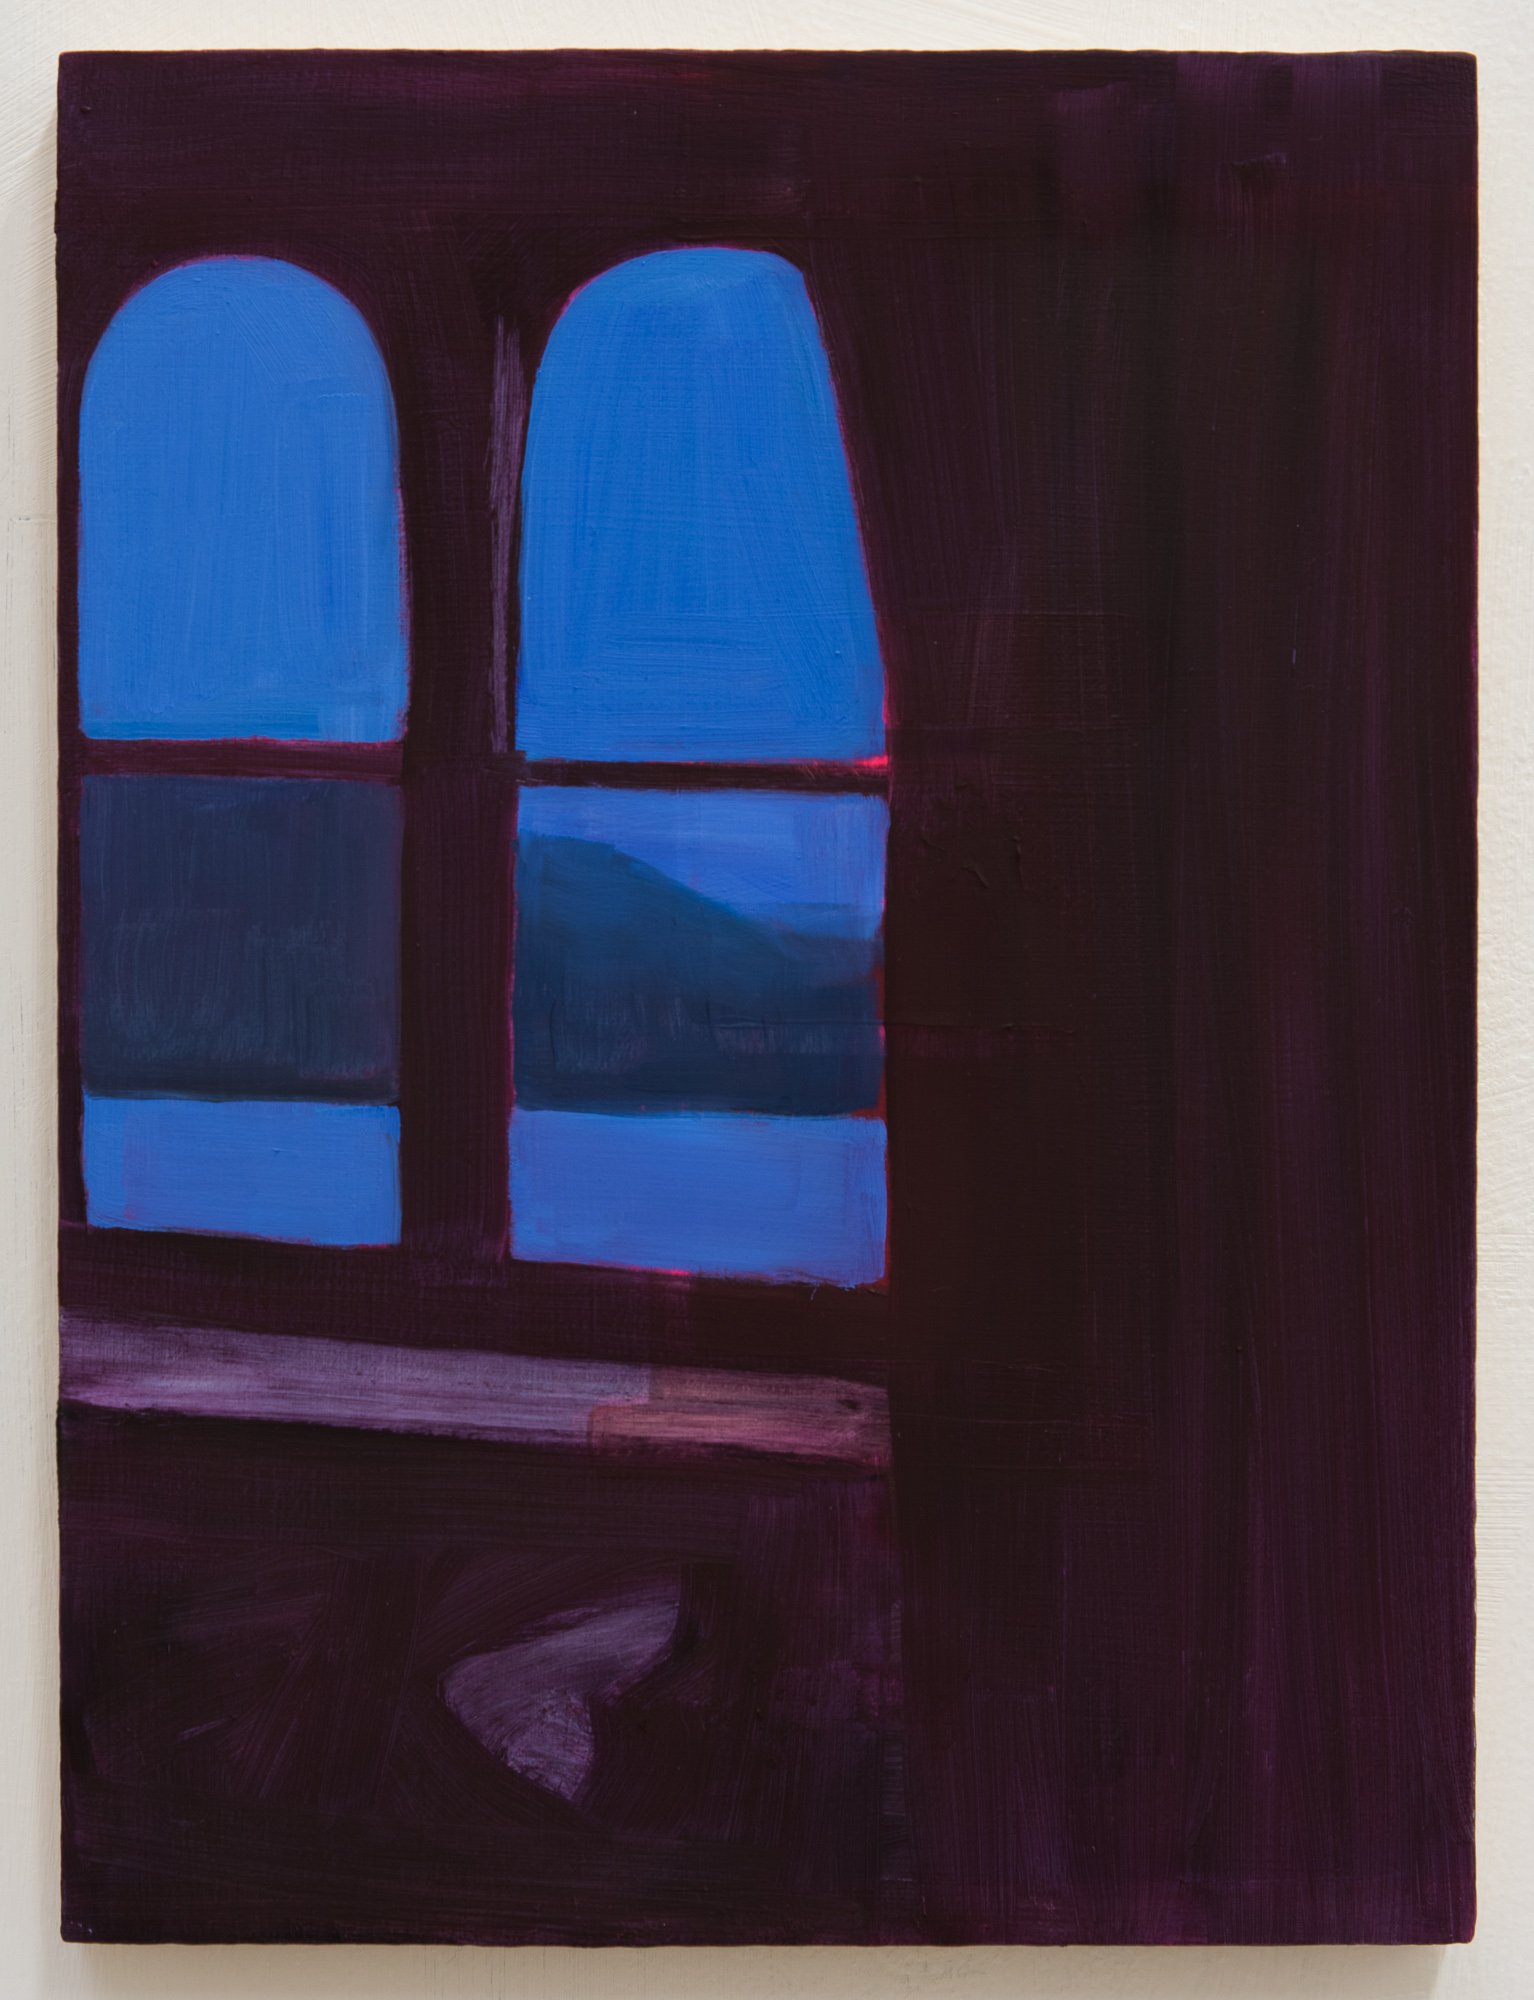  Blue Hour  Oil on board  30.5 x 23 cm  Private Collection 